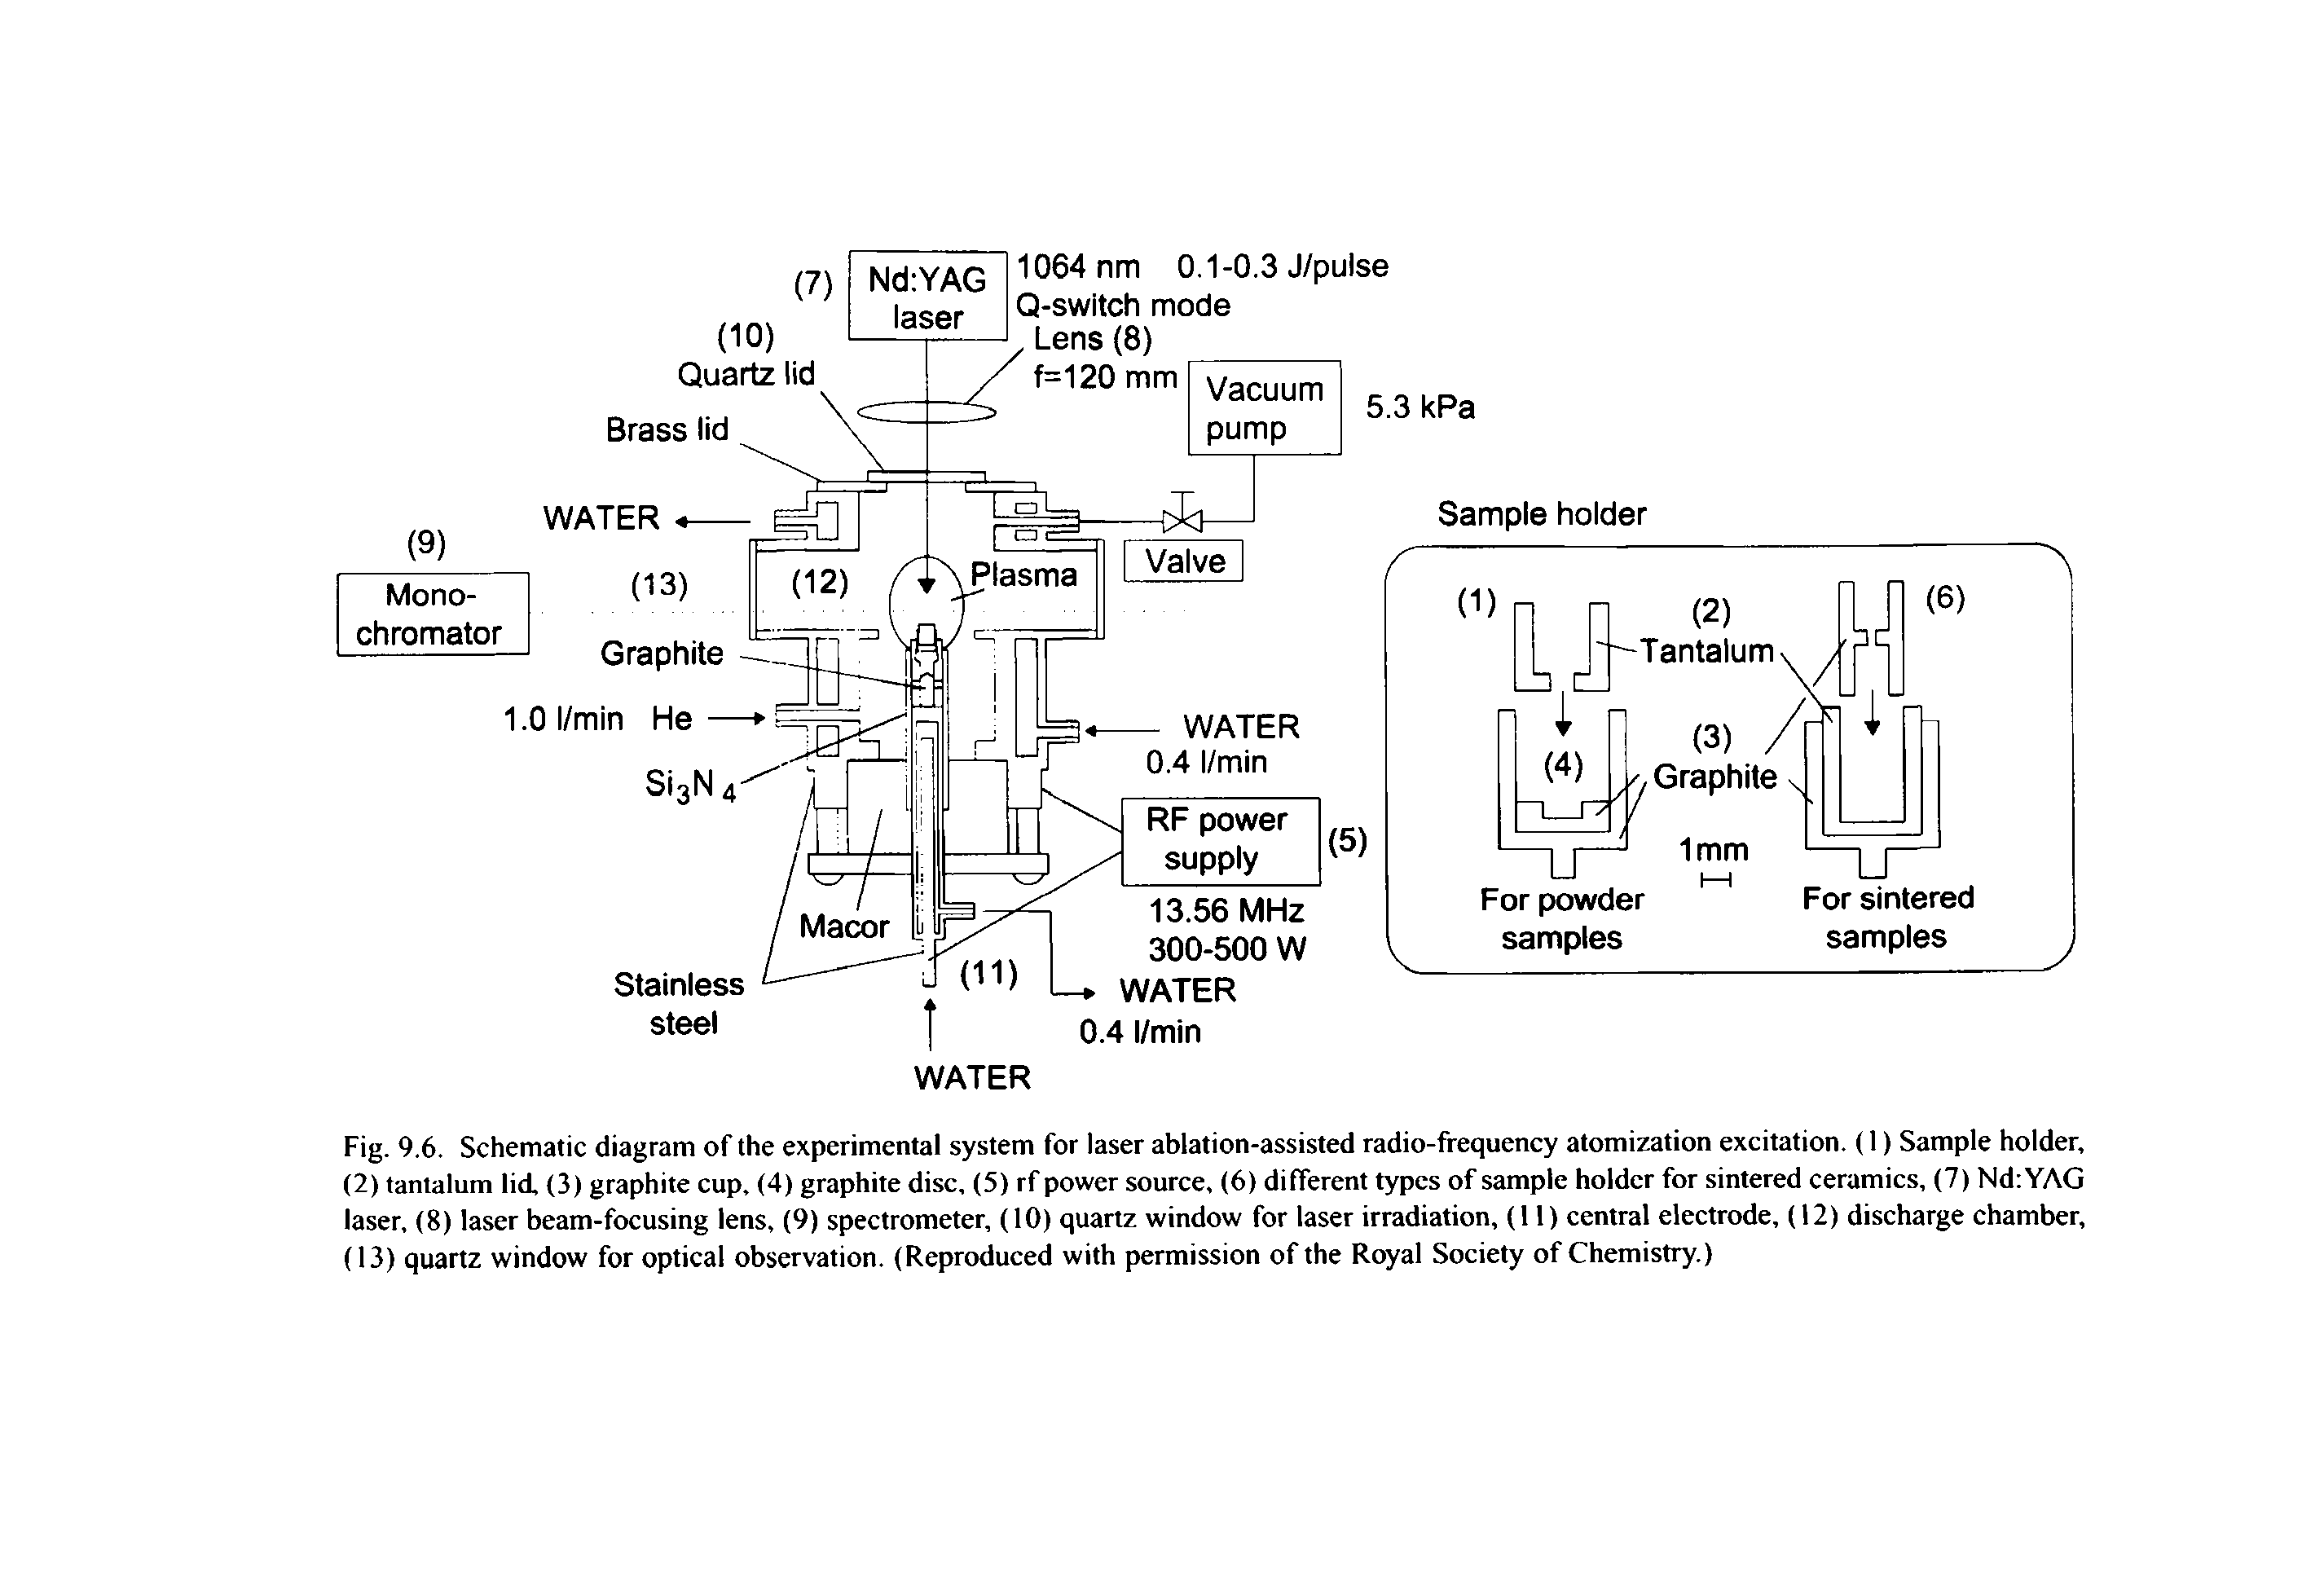 Fig. 9.6. Schematic diagram of the experimental system for laser ablation-assisted radio-frequency atomization excitation. (I) Sample holder, (2) tantalum lid, (3) graphite cup, (4) graphite disc, (5) rf power source, (6) different types of sample holder for sintered ceramics, (7) NdiYAG laser, (8) laser beam-focusing lens, (9) spectrometer, (10) quartz window for laser irradiation, (11) central electrode, (12) discharge chamber, (13) quartz window for optical observation. (Reproduced with permission of the Royal Society of Chemistry.)...